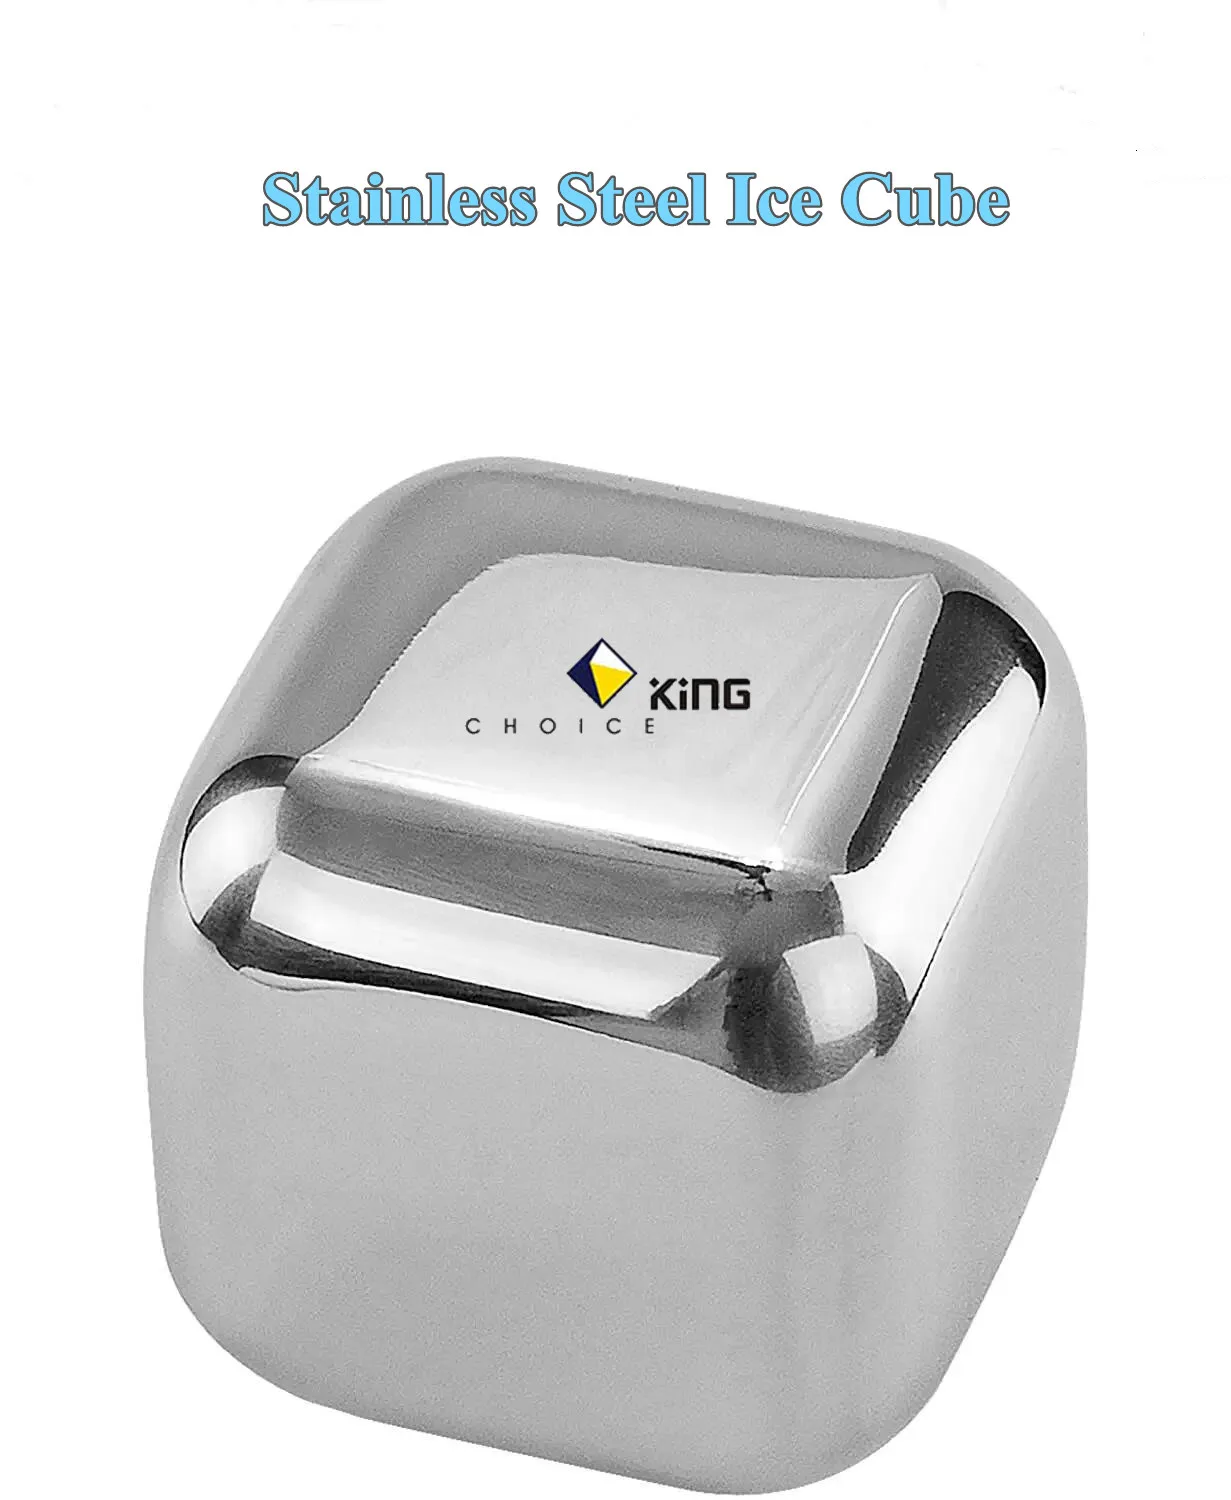 TOP SELLER Reusable Ice Cubes Cooling whisky rocks Metal Ice Cubes Chilling Stones Stainless Steel Ice Cubes